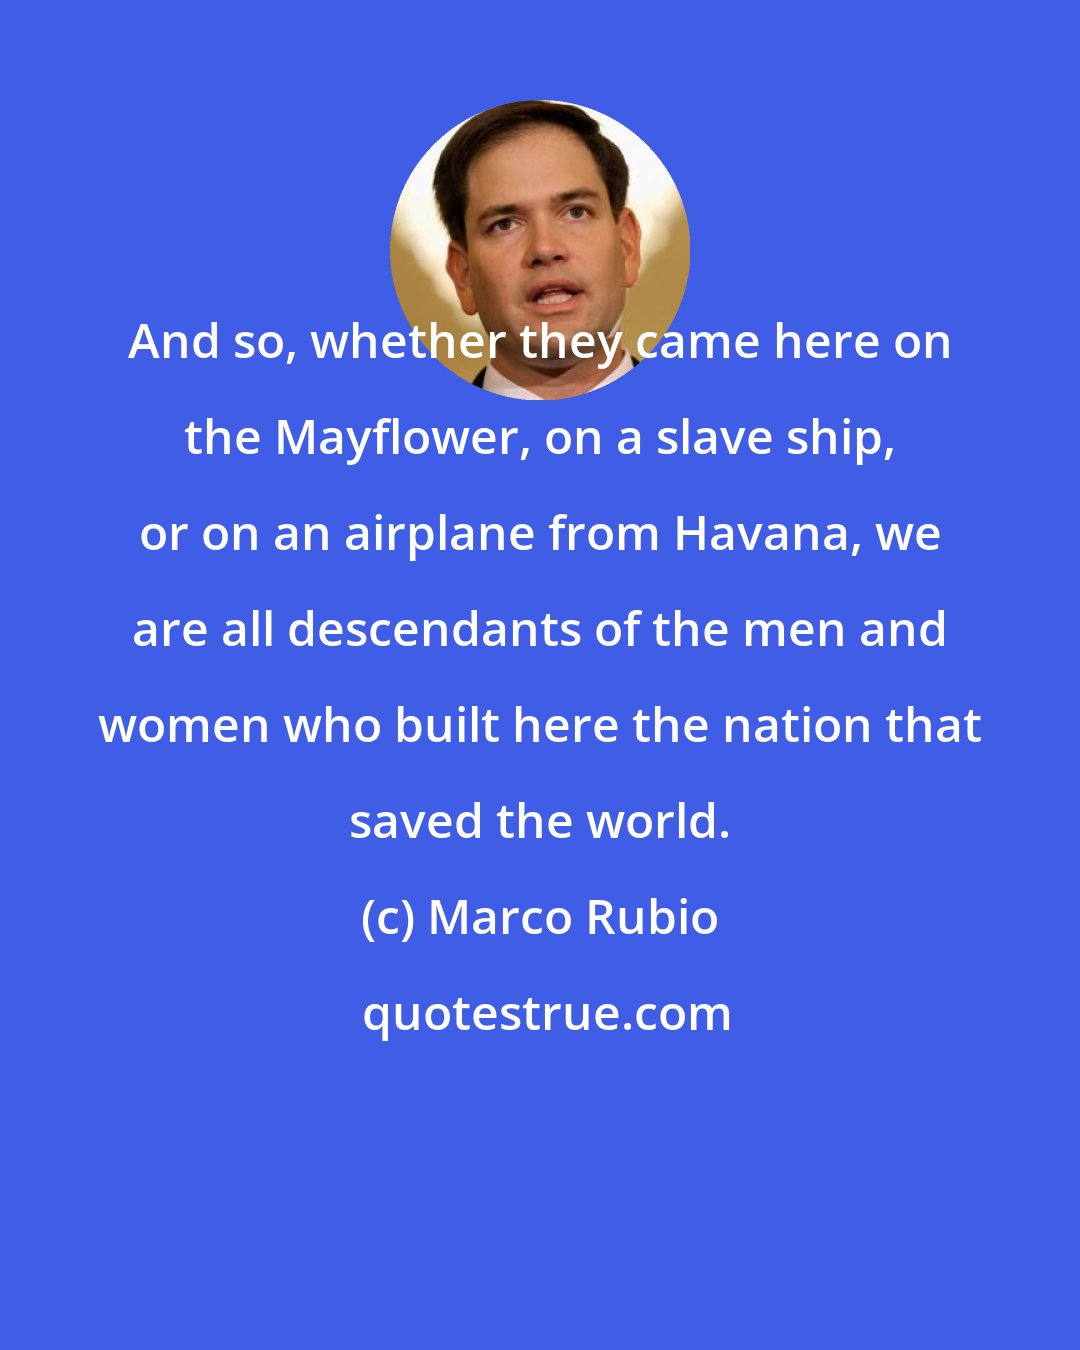 Marco Rubio: And so, whether they came here on the Mayflower, on a slave ship, or on an airplane from Havana, we are all descendants of the men and women who built here the nation that saved the world.